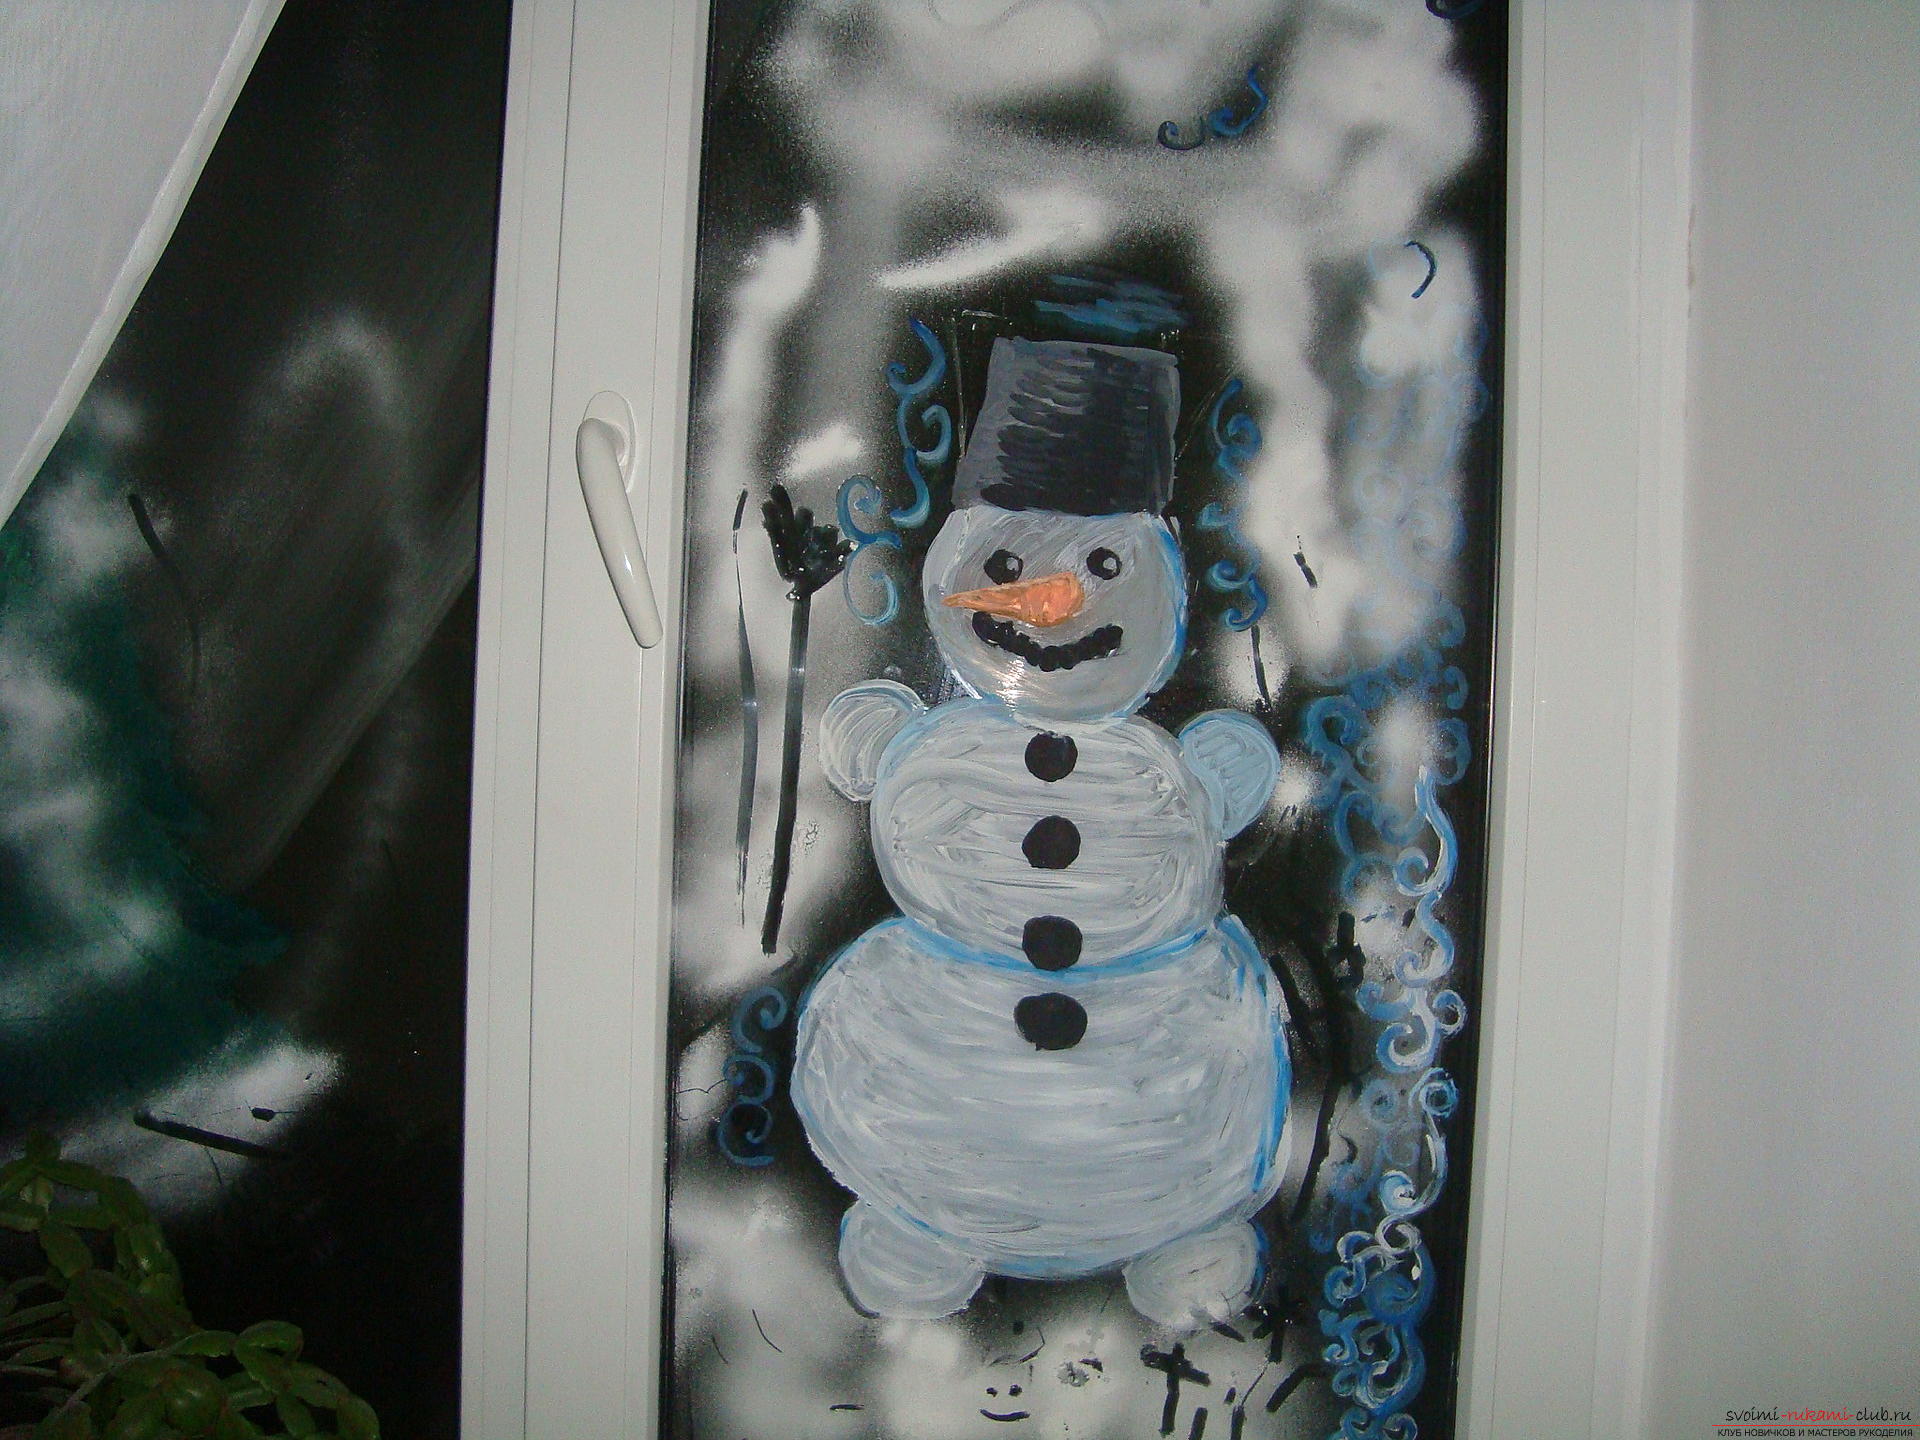 Decoration of windows for the New Year is the most interesting occupation. Whimsical patterns on the windows can be made with gouache, toothpaste or using artificial snow .. Photo # 4